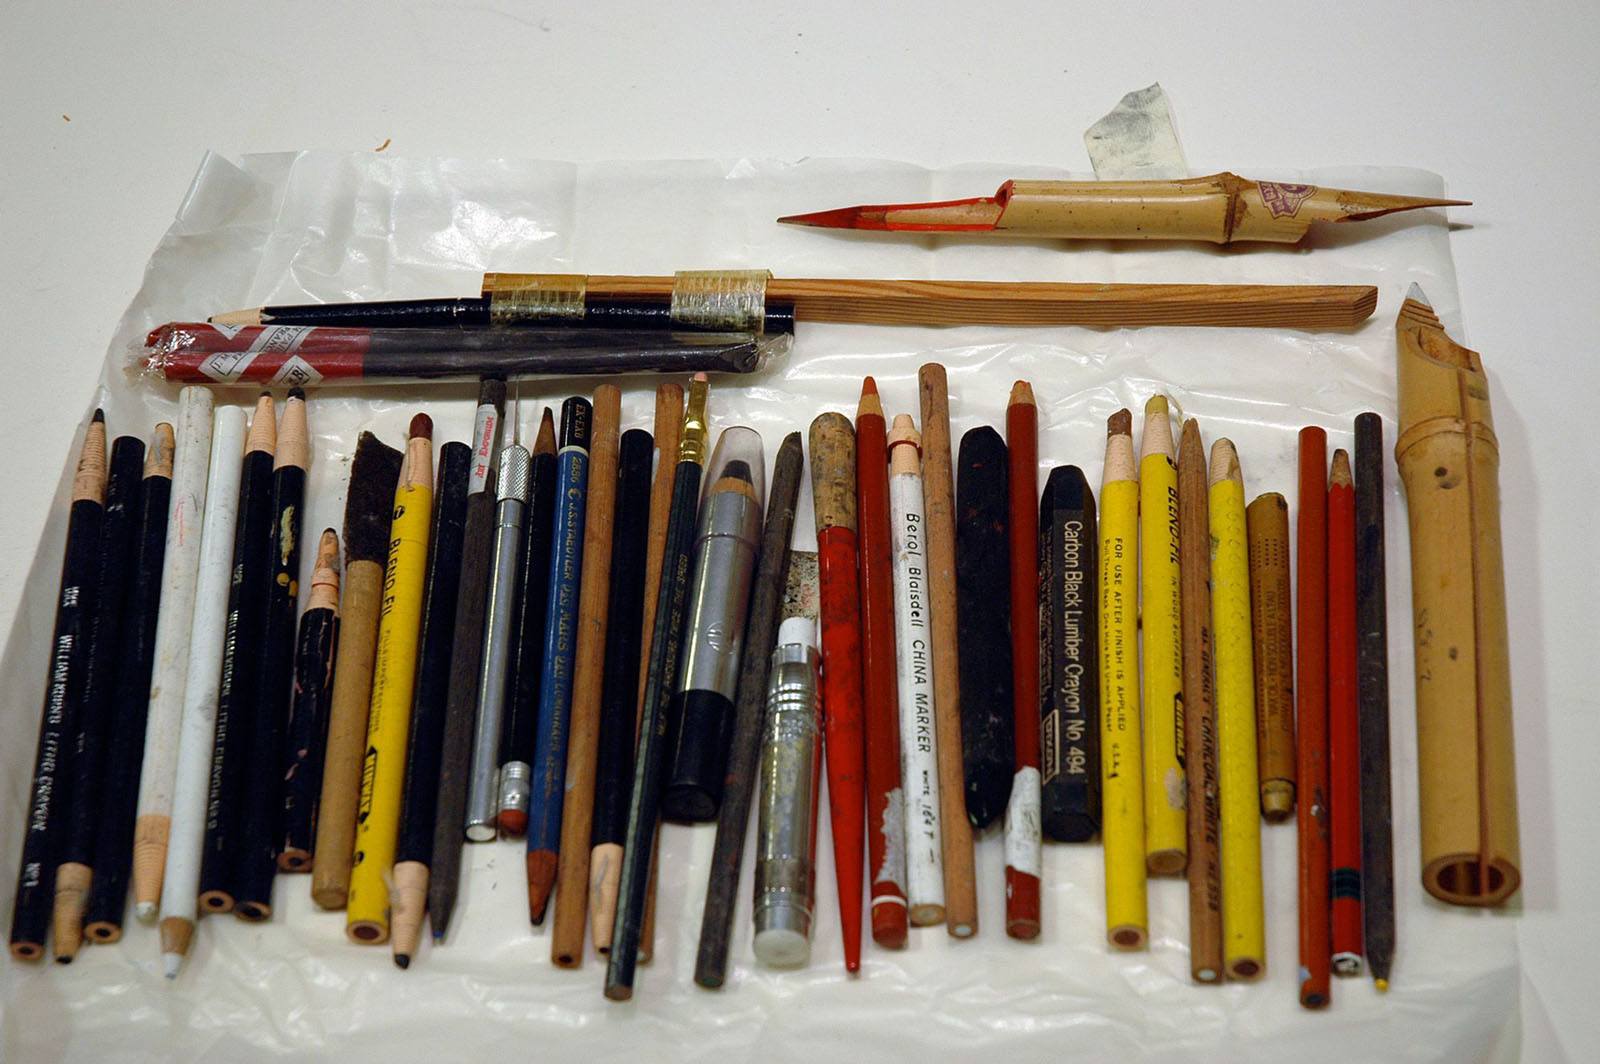 Assorted used drawing tools including conte crayons, charcoal, colored pencils, and bamboo utensils